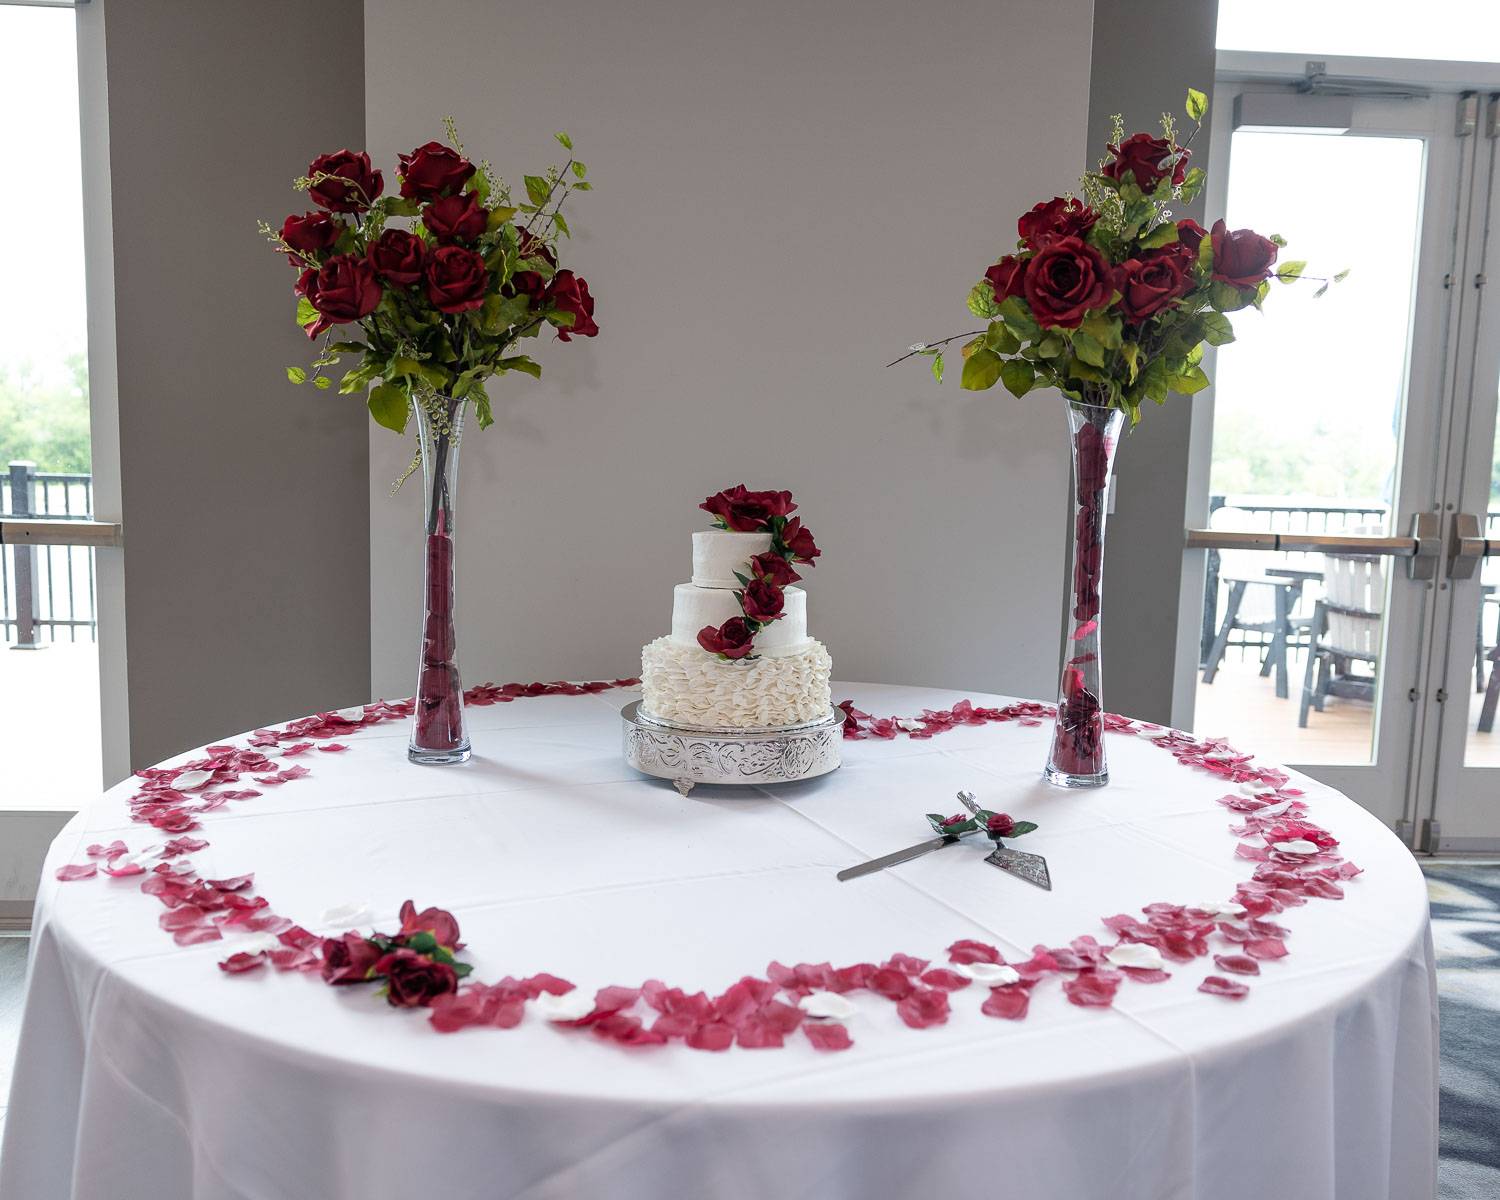 The wedding cake and roses on the table